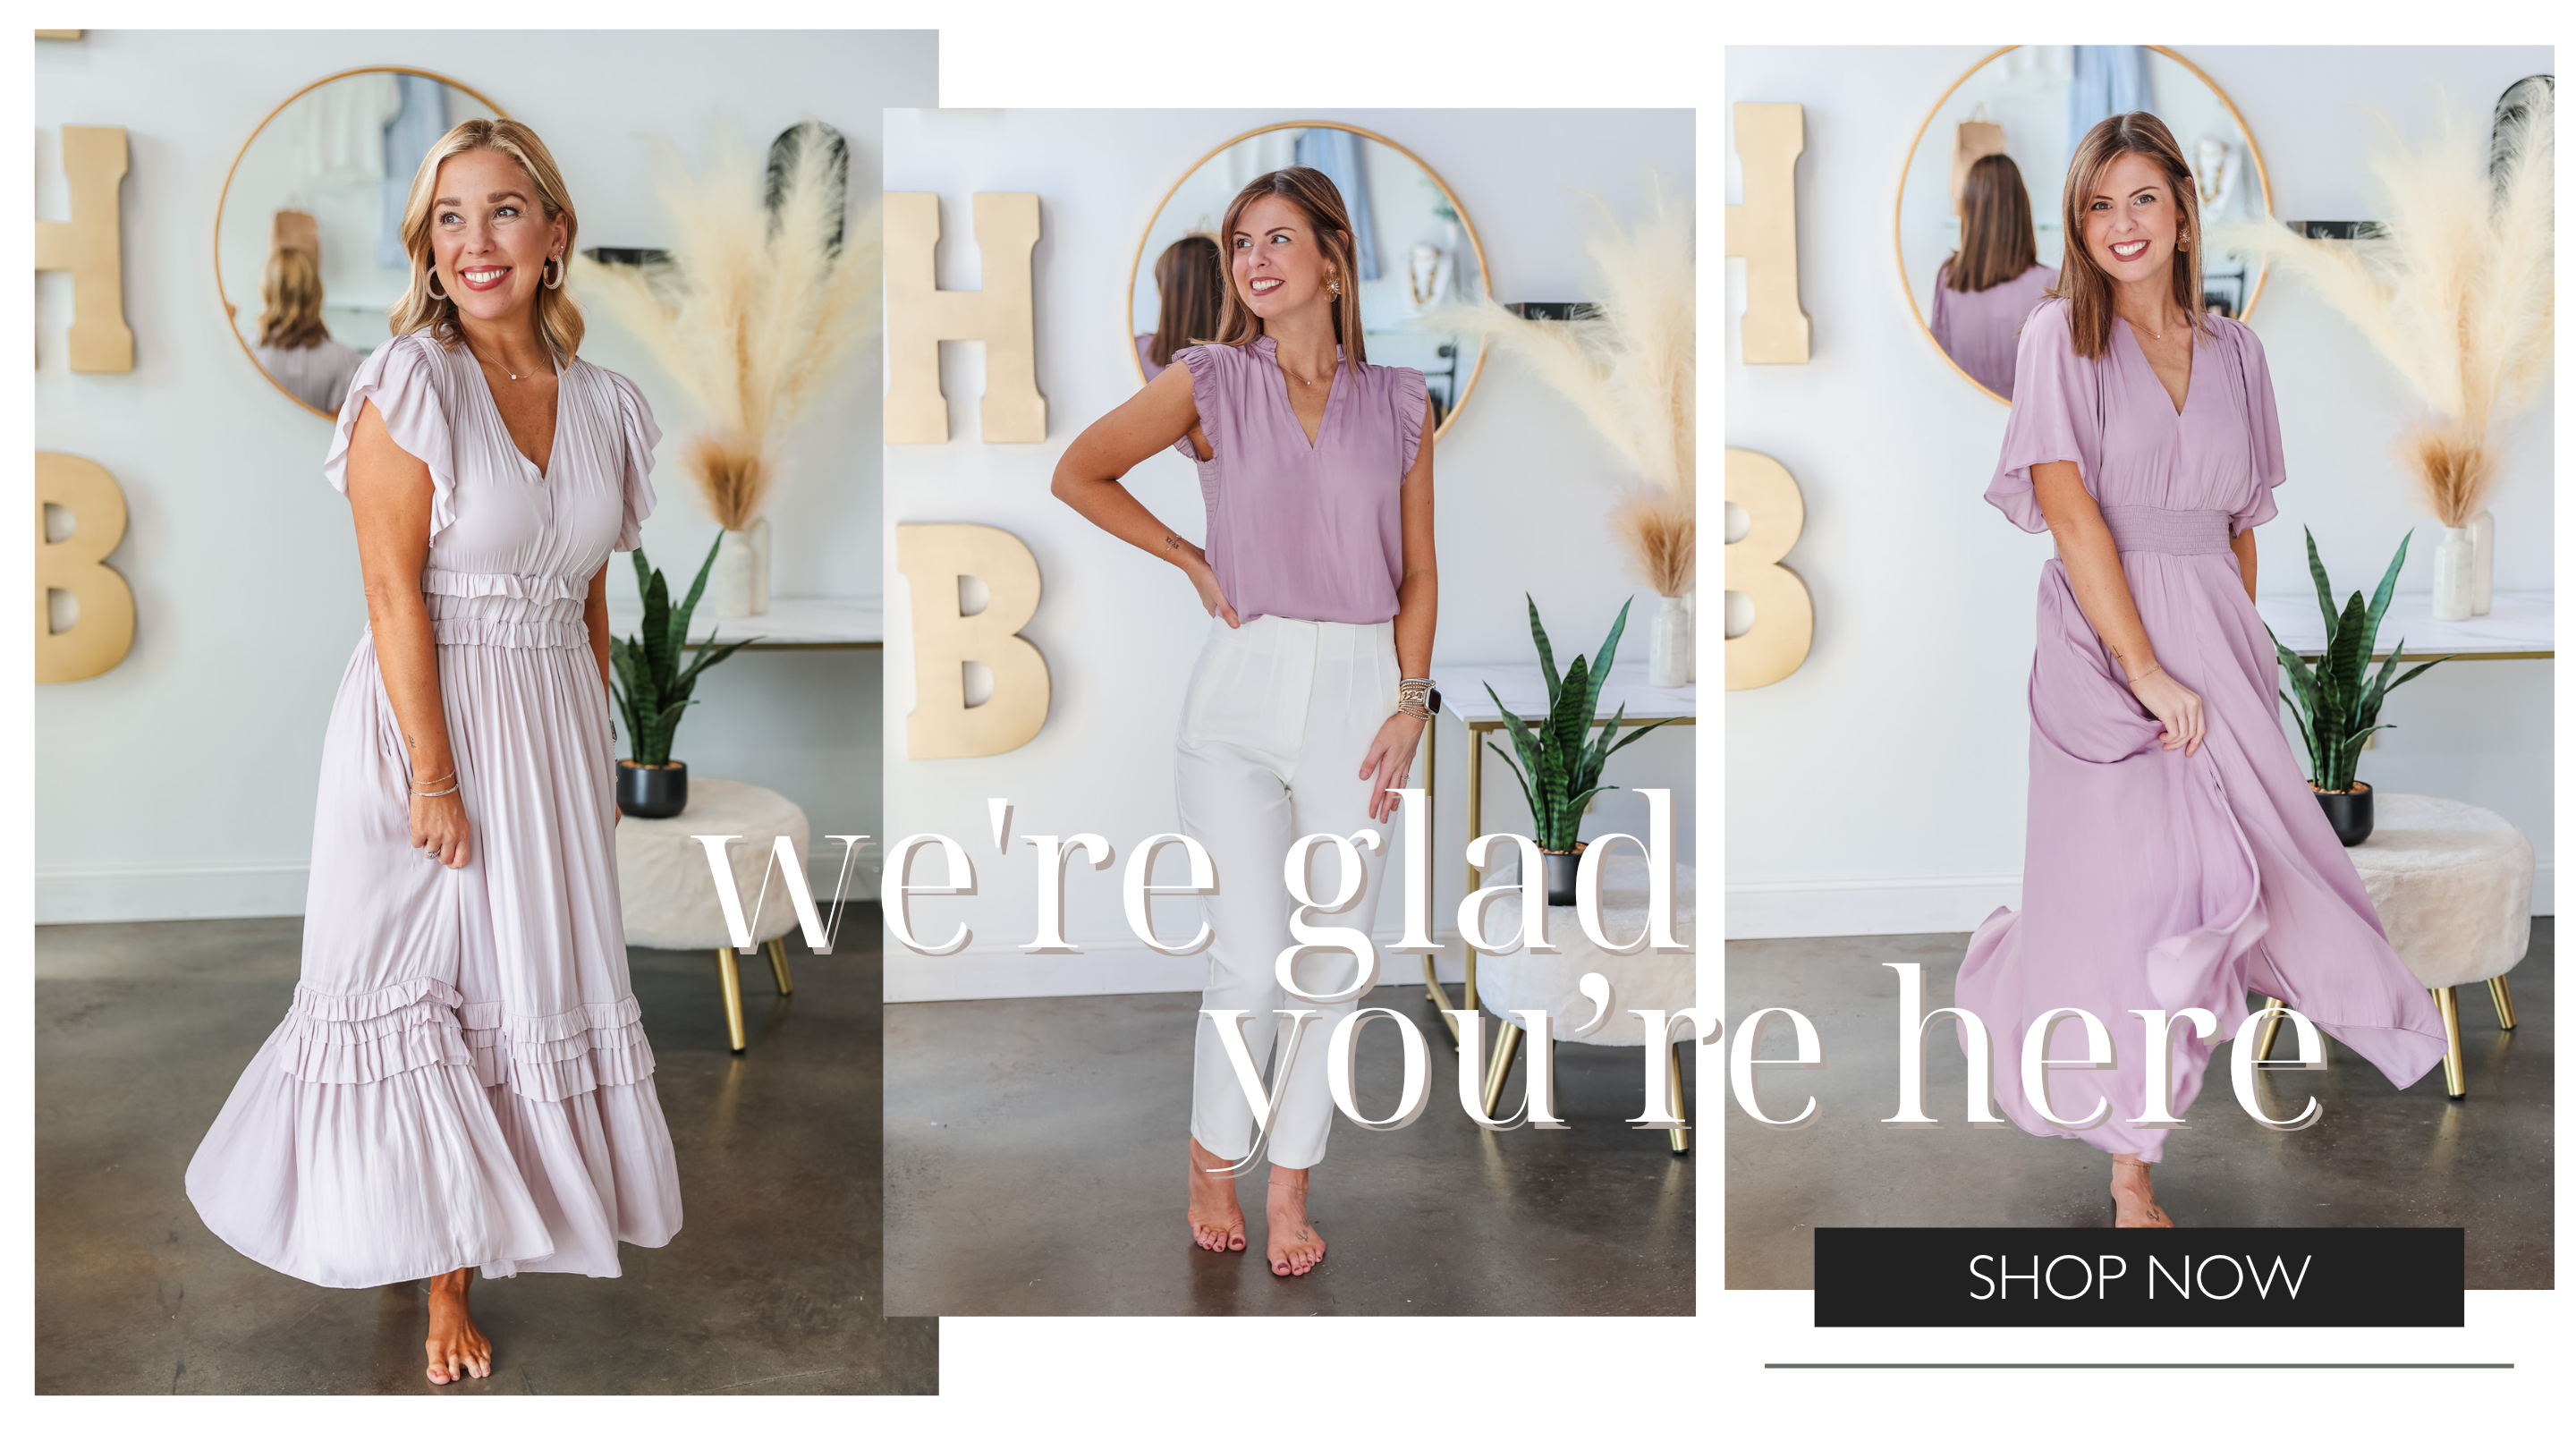 Three images all inside Ivy House Boutique. The first is of a blond girl wearing a long purple dress, the second one is wearing white pants and a purple top, and the third is of a brunette girl wearing another purple dress. The text says "we're glad you're here" with a button that says shop now. 